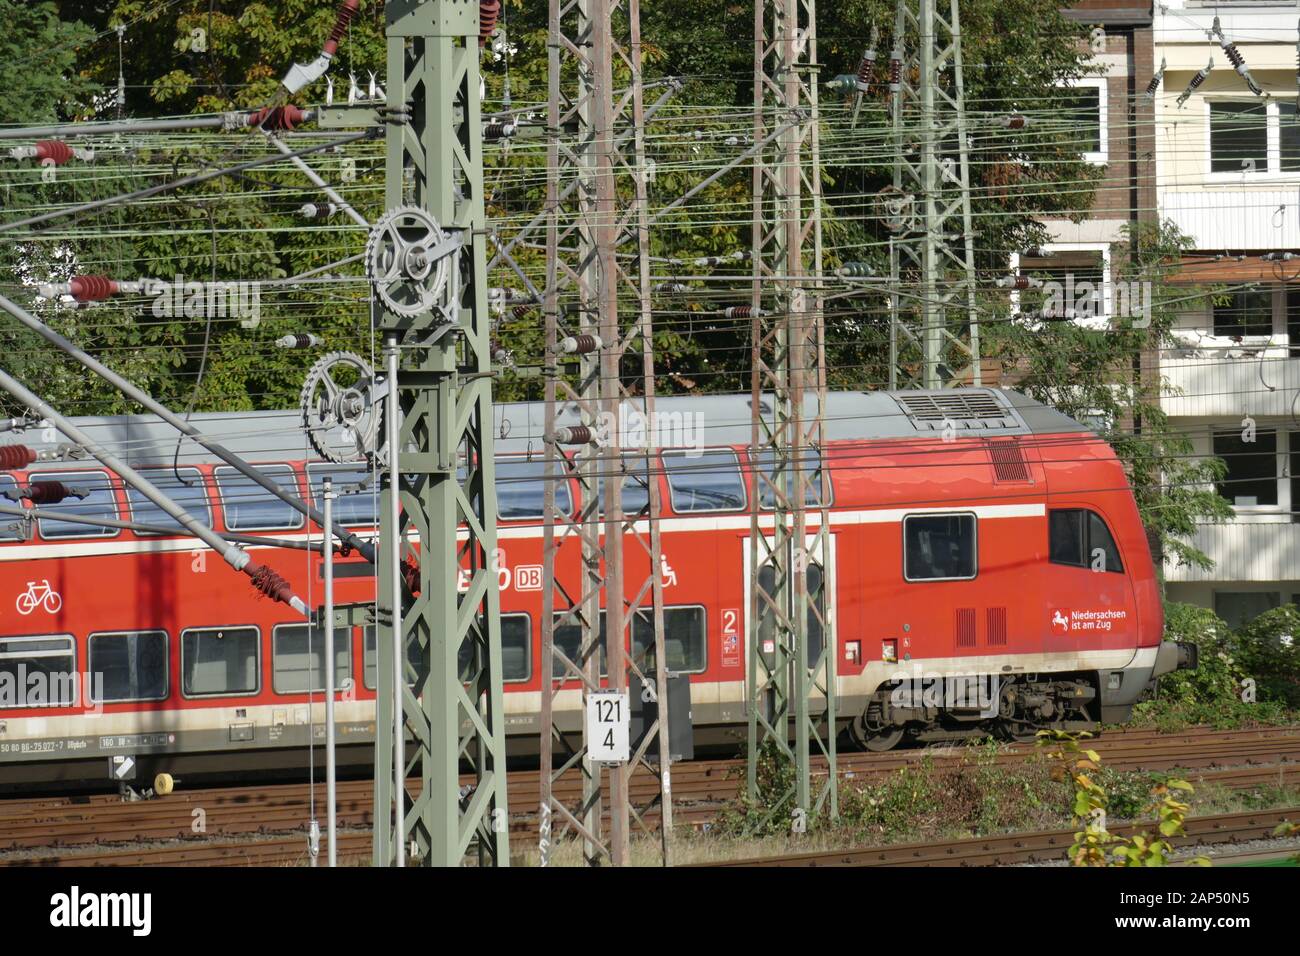 Red commuter trains, railway facilities, Bremen, Germany Stock Photo